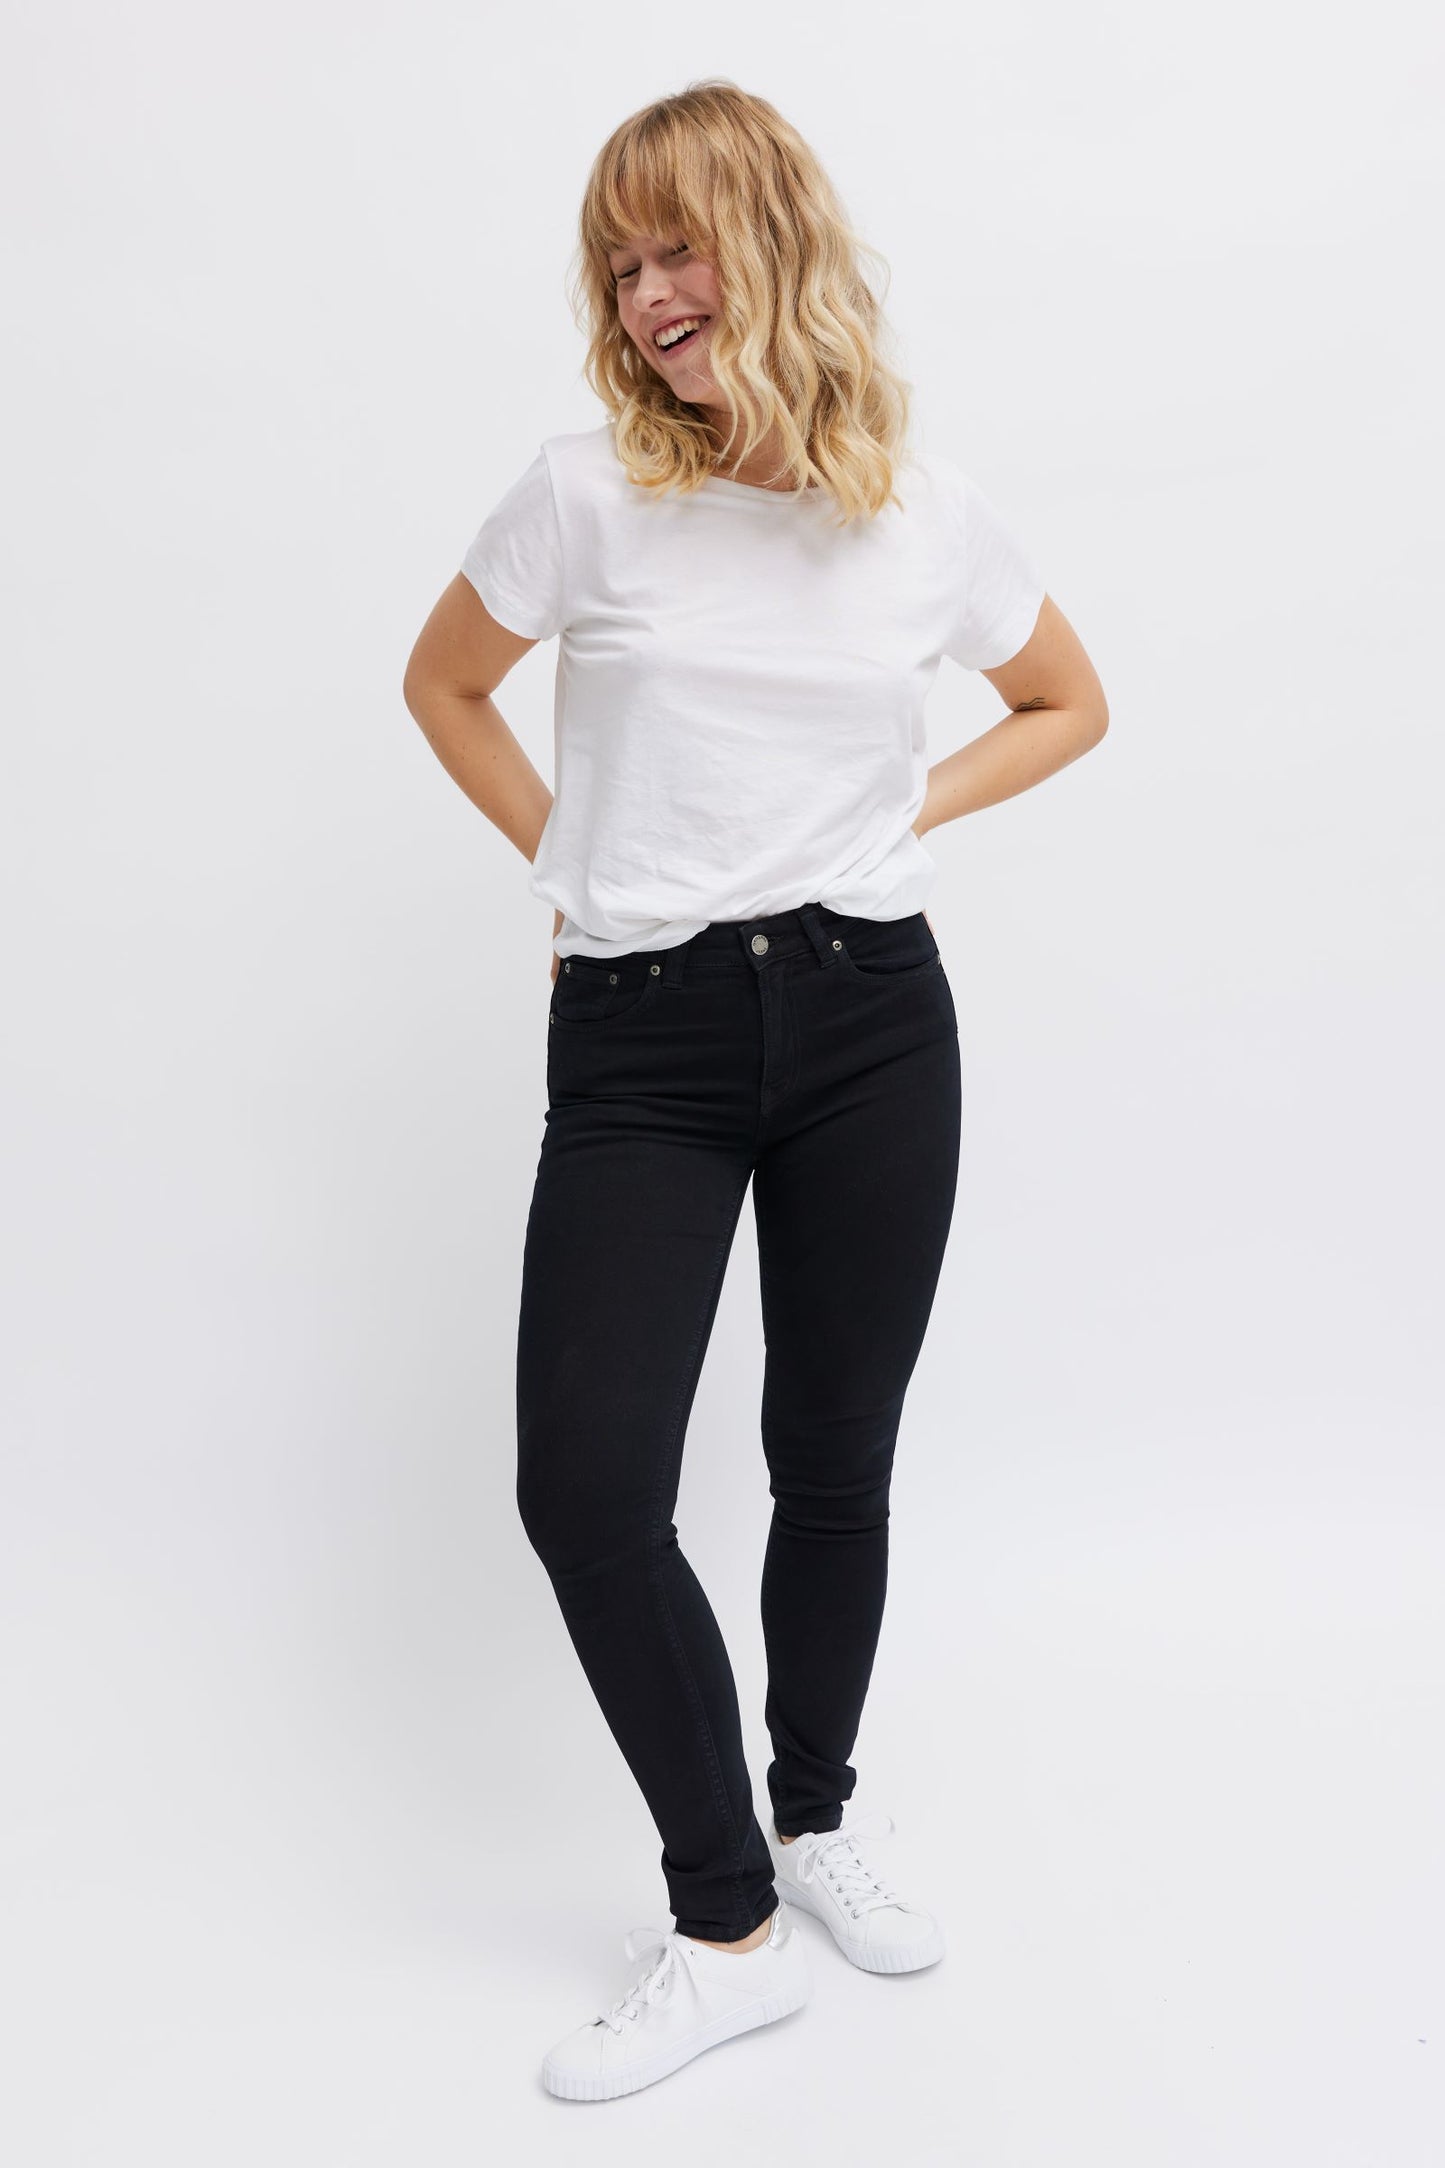 Best black everyday jeans - Women's organic cotton jeans - Ethically made fashion